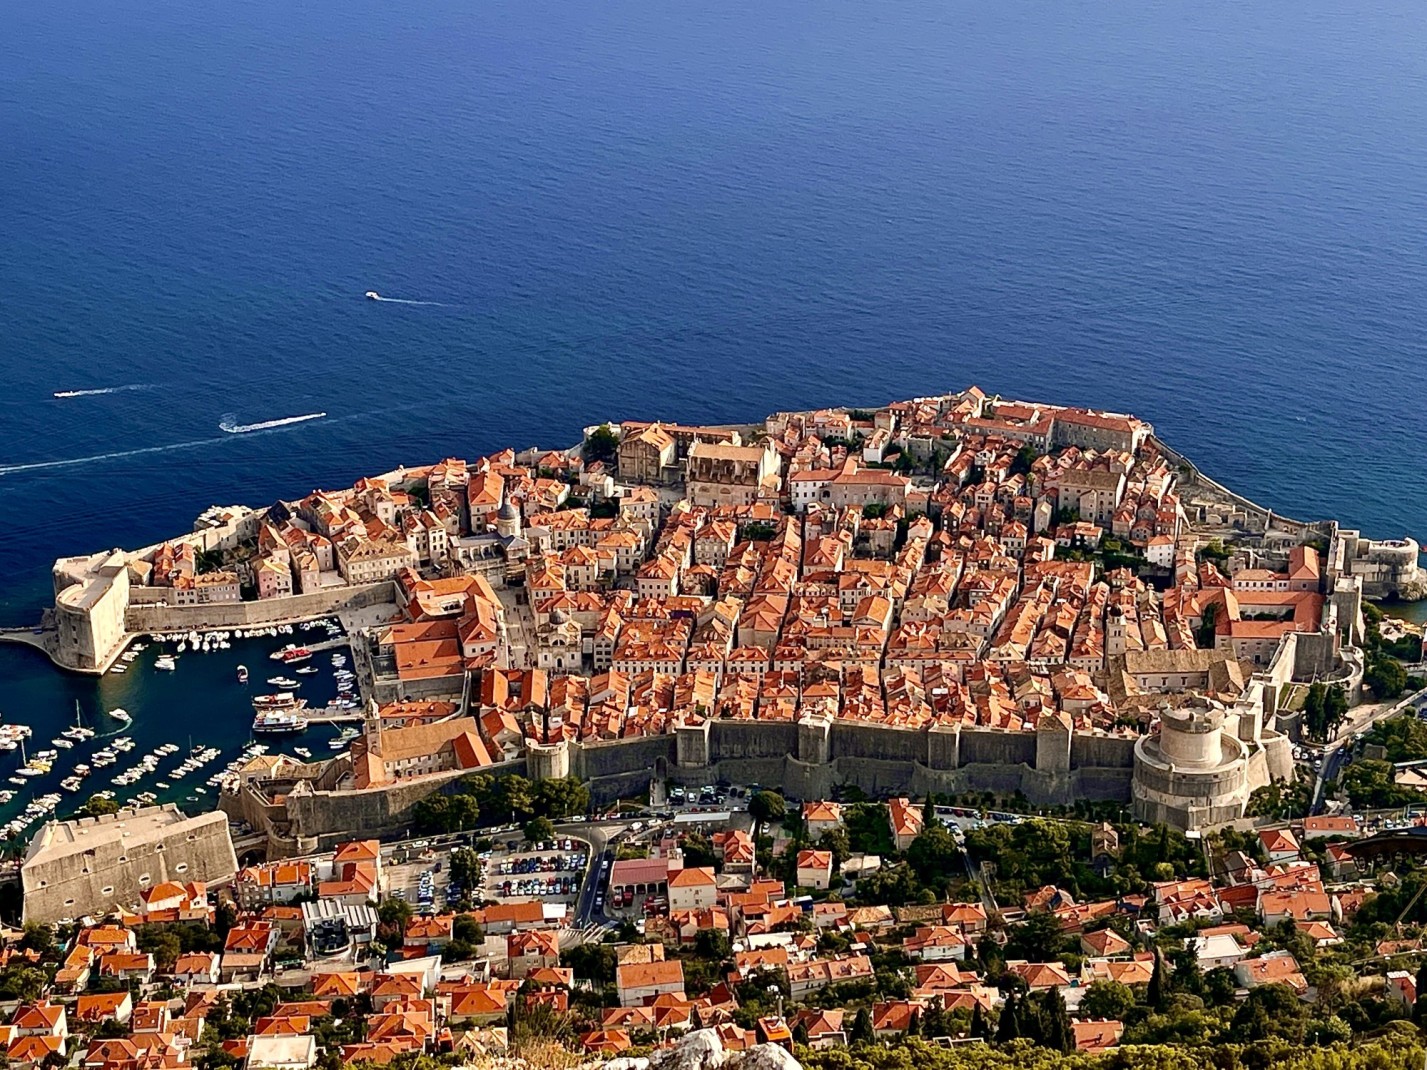 Aerial view of Dubrovnik against deep blue ocean with boats.